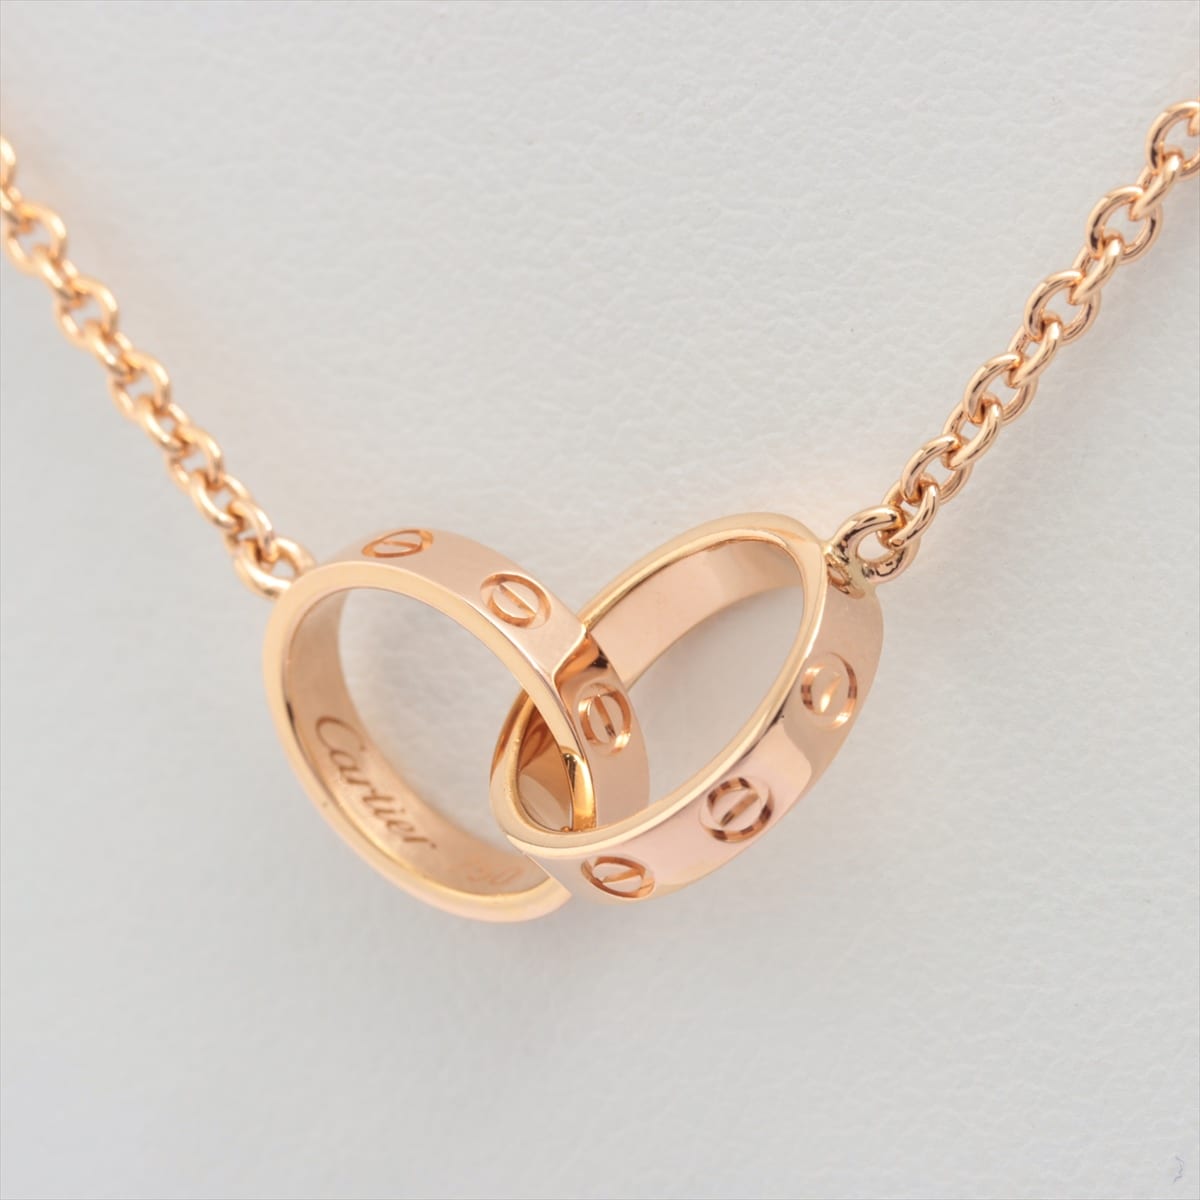 Cartier Baby Love Necklace 750(PG) 6.5g